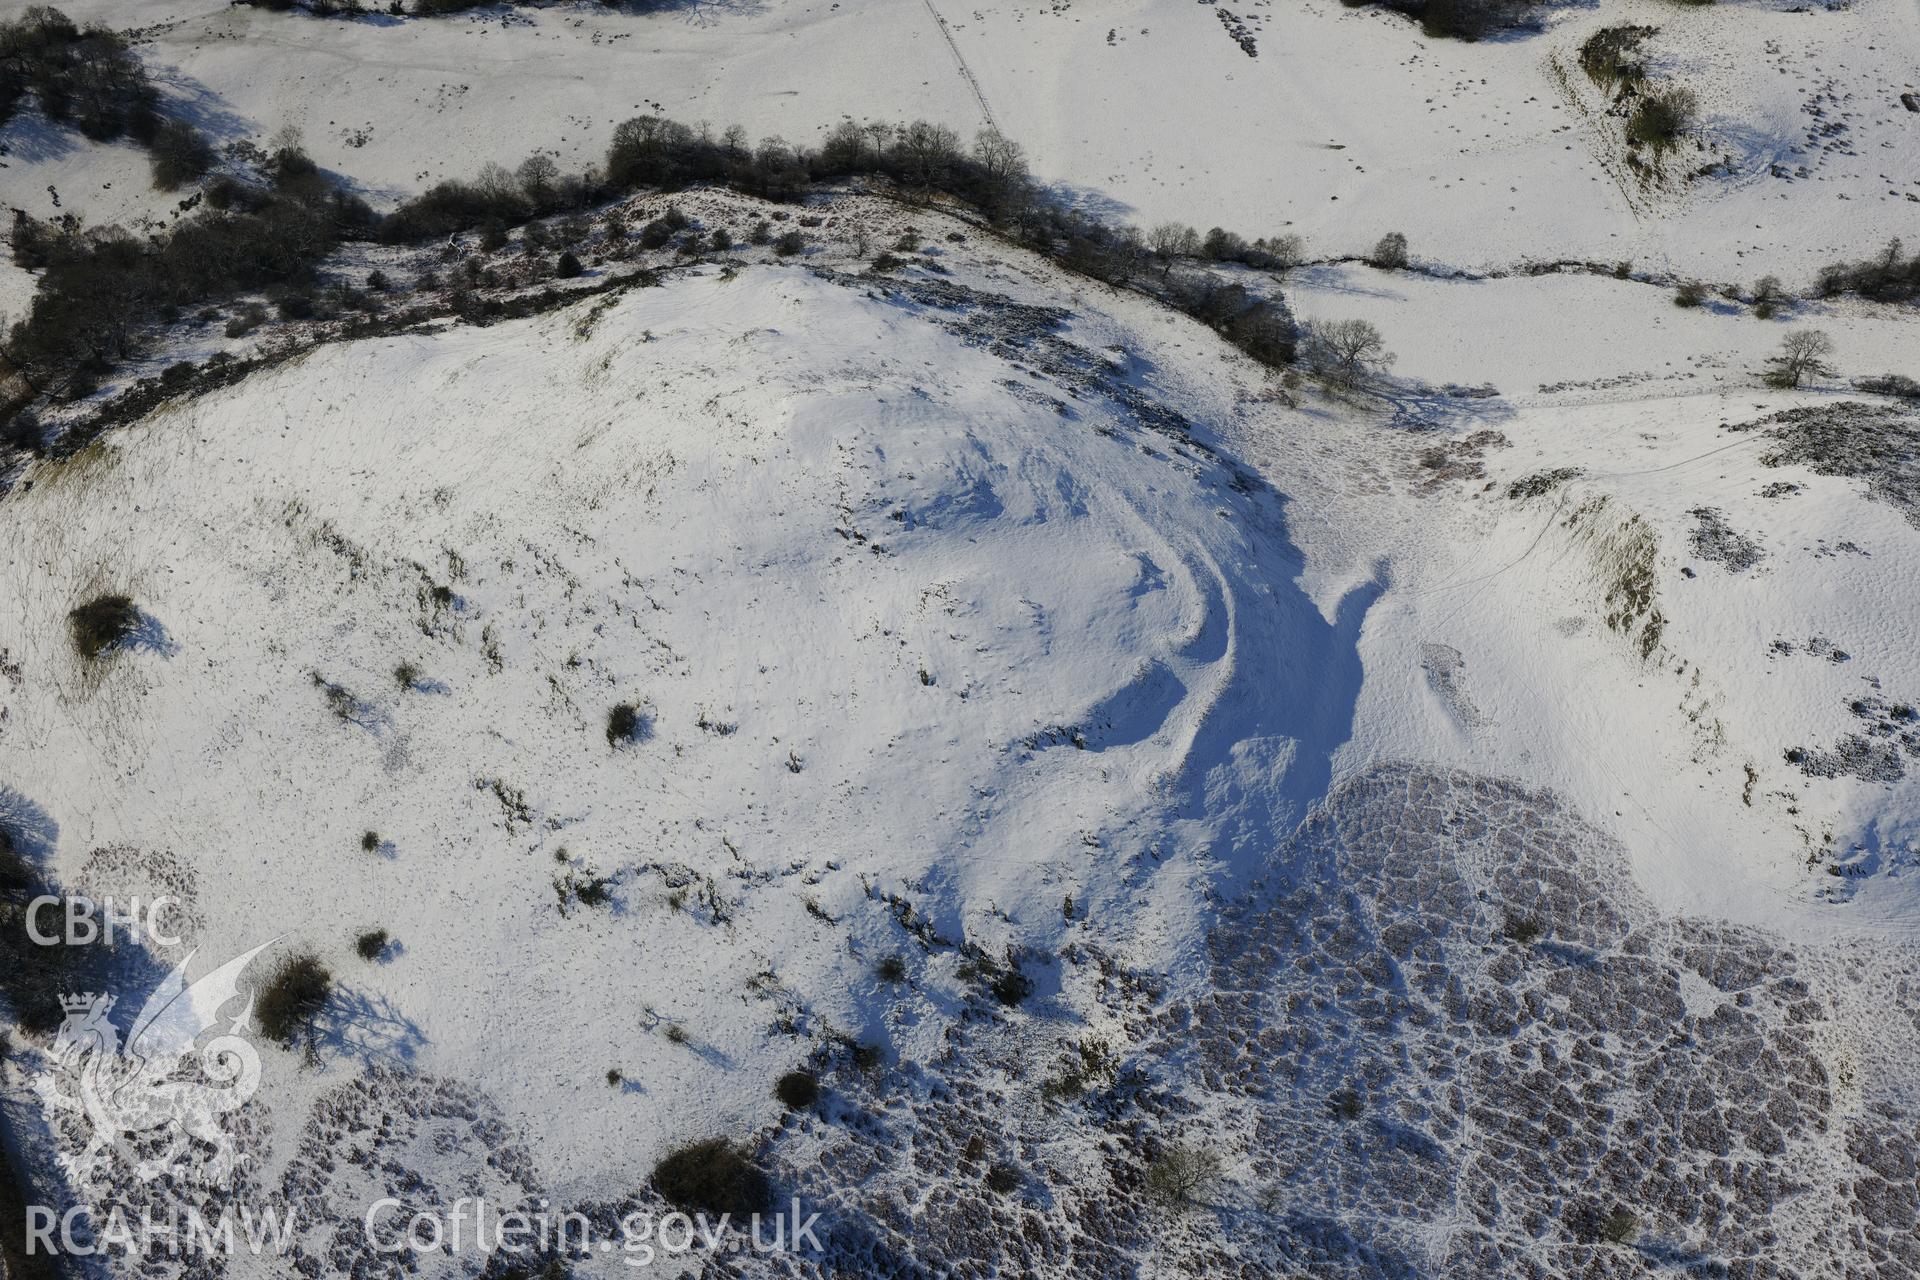 Caer Einon hillfort and three hut platforms, north east of Builth Wells. Oblique aerial photograph taken during the Royal Commission?s programme of archaeological aerial reconnaissance by Toby Driver on 15th January 2013.